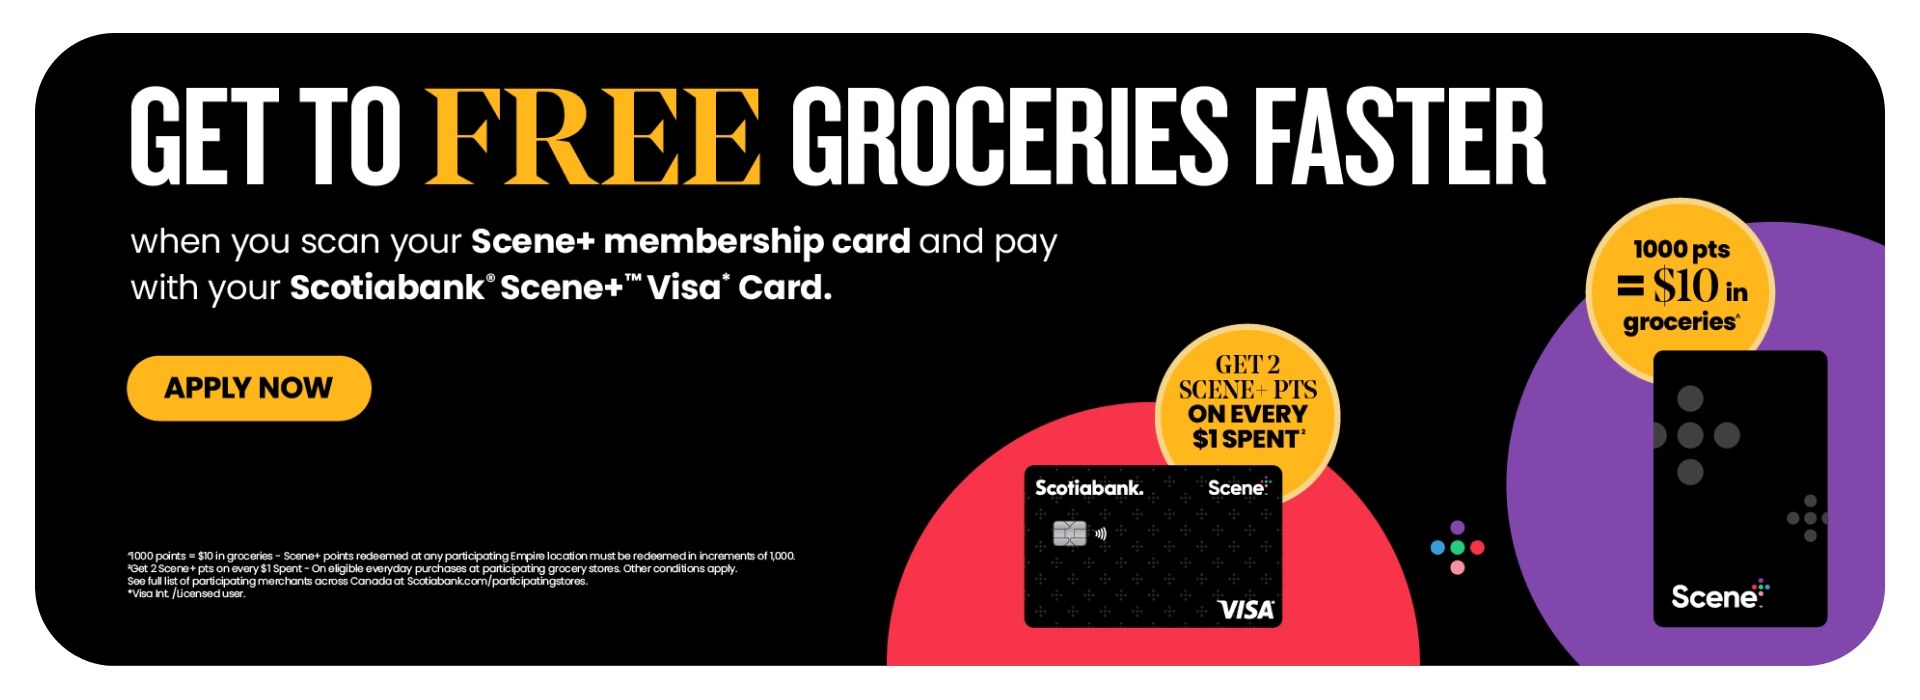 Advertisement for a Scotiabank Scene+ Visa Card. The text highlights the benefit of earning free groceries by earning Scene+ points with every dollar spent. Includes images of Scene+ membership and Visa cards, along with a "Get 2 Scene+ points on every $1 spent" offer.